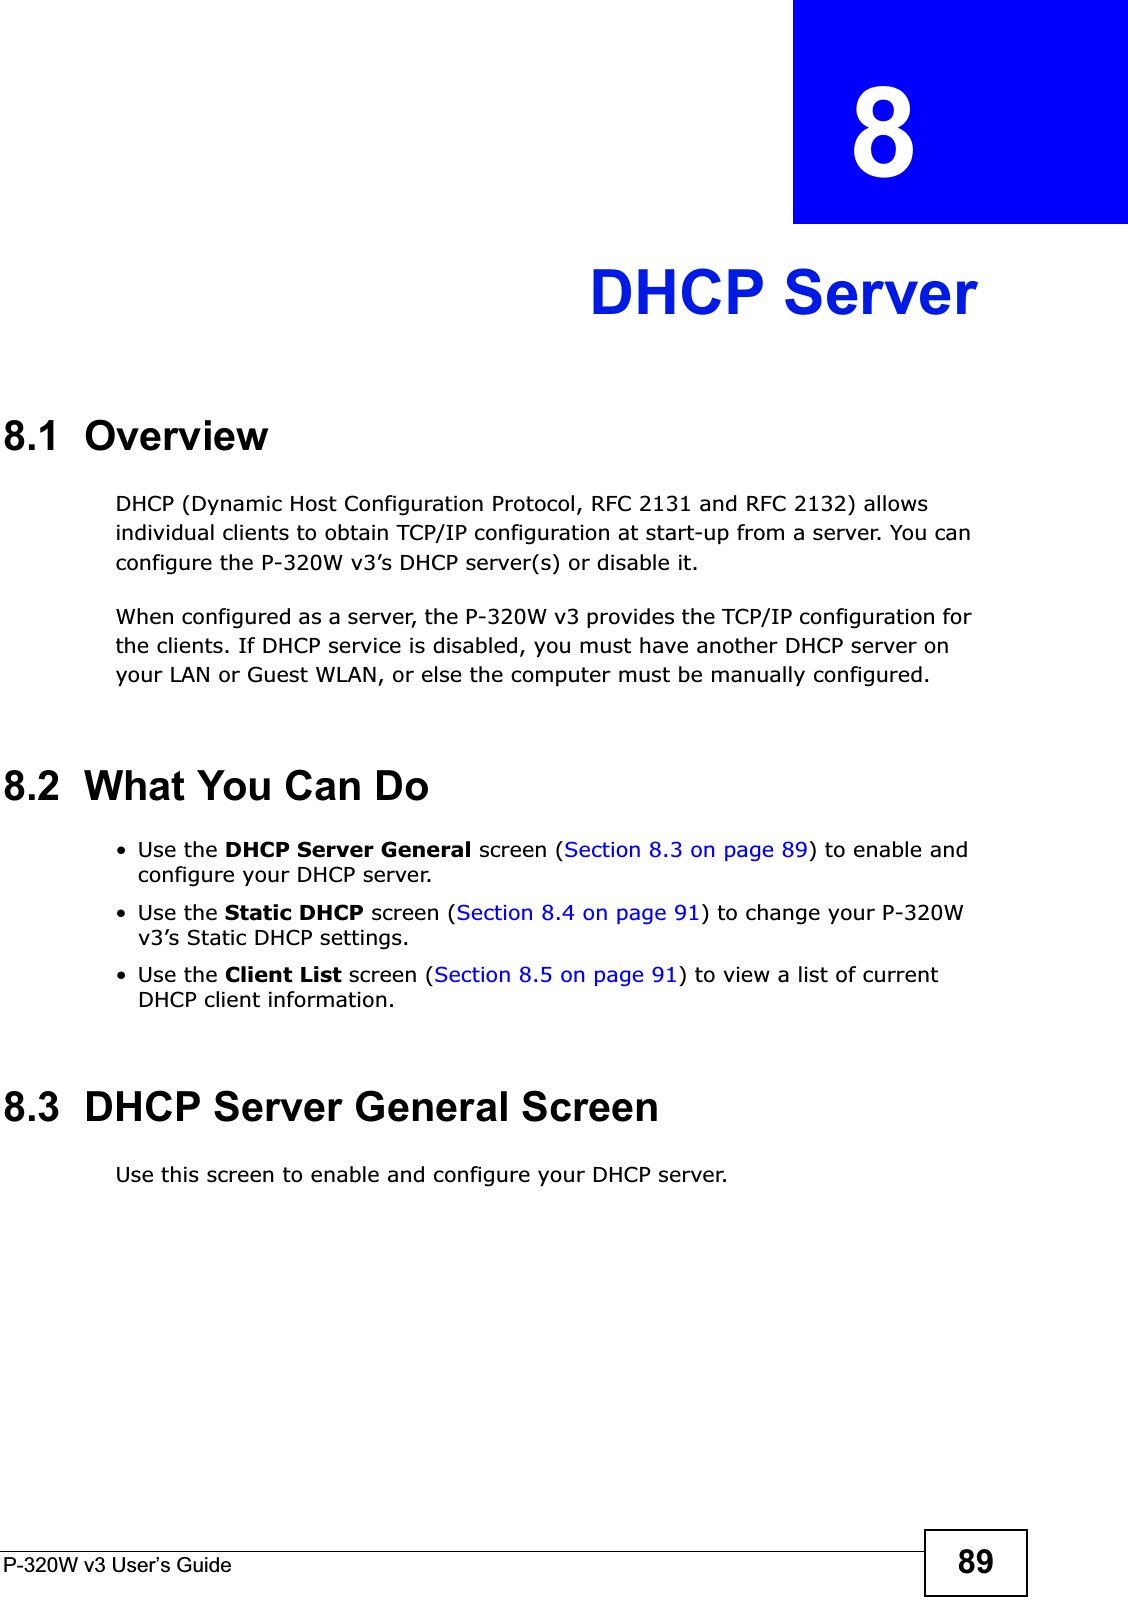 P-320W v3 User’s Guide 89CHAPTER  8 DHCP Server8.1  OverviewDHCP (Dynamic Host Configuration Protocol, RFC 2131 and RFC 2132) allows individual clients to obtain TCP/IP configuration at start-up from a server. You can configure the P-320W v3’s DHCP server(s) or disable it. When configured as a server, the P-320W v3 provides the TCP/IP configuration for the clients. If DHCP service is disabled, you must have another DHCP server on your LAN or Guest WLAN, or else the computer must be manually configured.8.2  What You Can Do•Use the DHCP Server General screen (Section 8.3 on page 89) to enable and configure your DHCP server.•Use the Static DHCP screen (Section 8.4 on page 91) to change your P-320W v3’s Static DHCP settings.•Use the Client List screen (Section 8.5 on page 91) to view a list of current DHCP client information.8.3  DHCP Server General ScreenUse this screen to enable and configure your DHCP server.